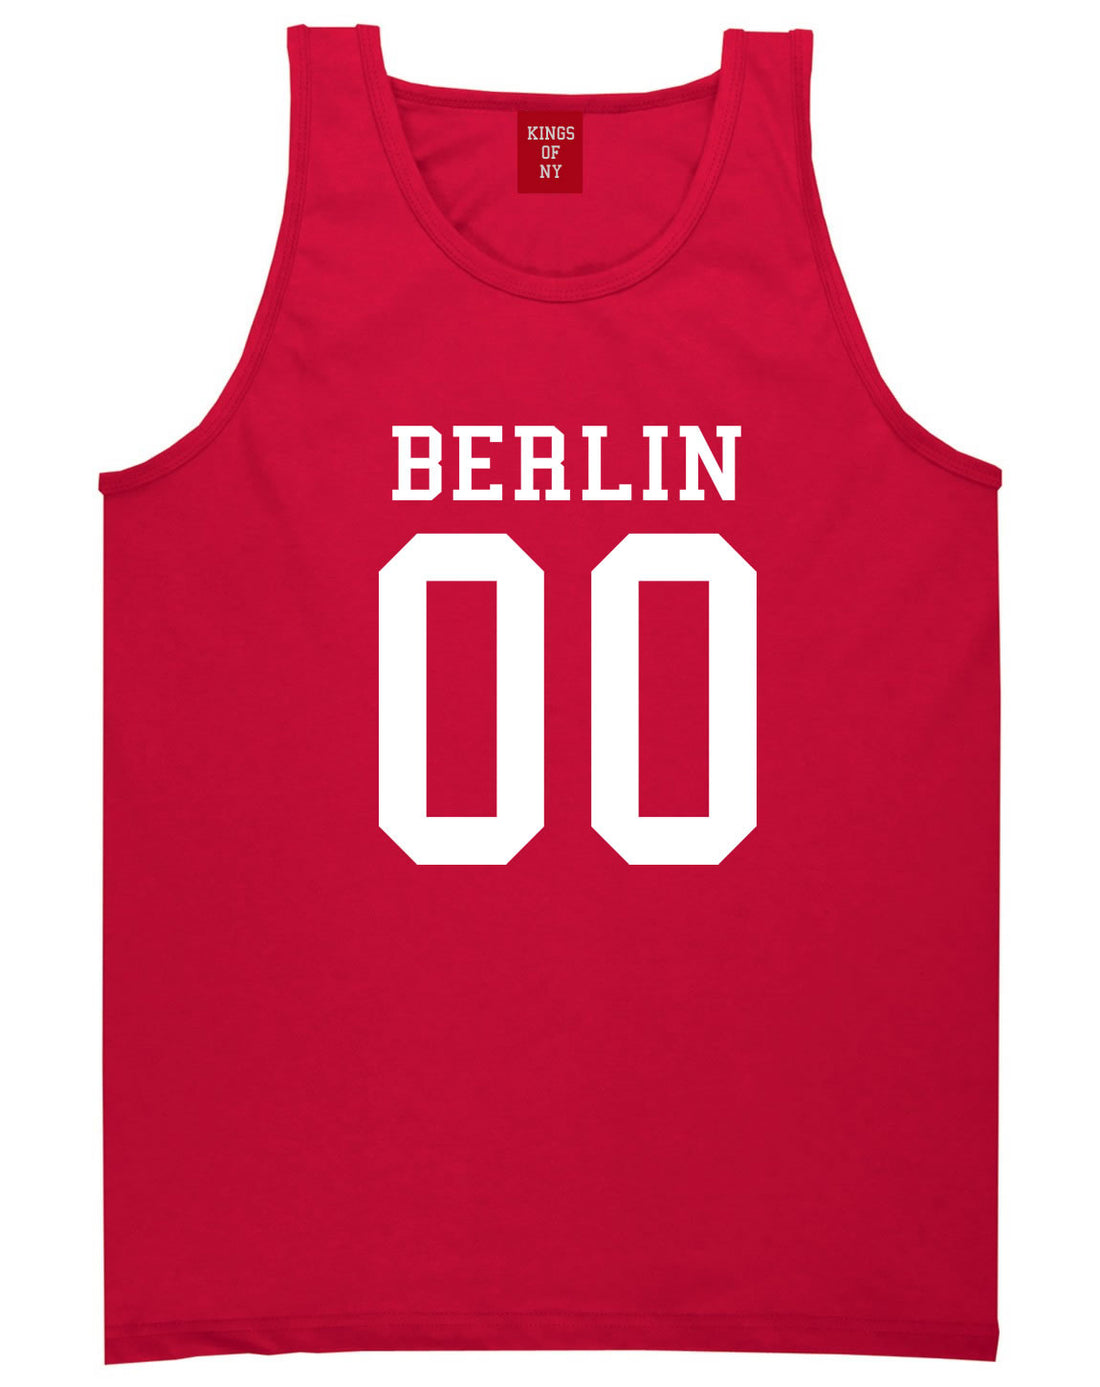 Berlin Team Jersey Germany Country Tank Top in Red By Kings Of NY